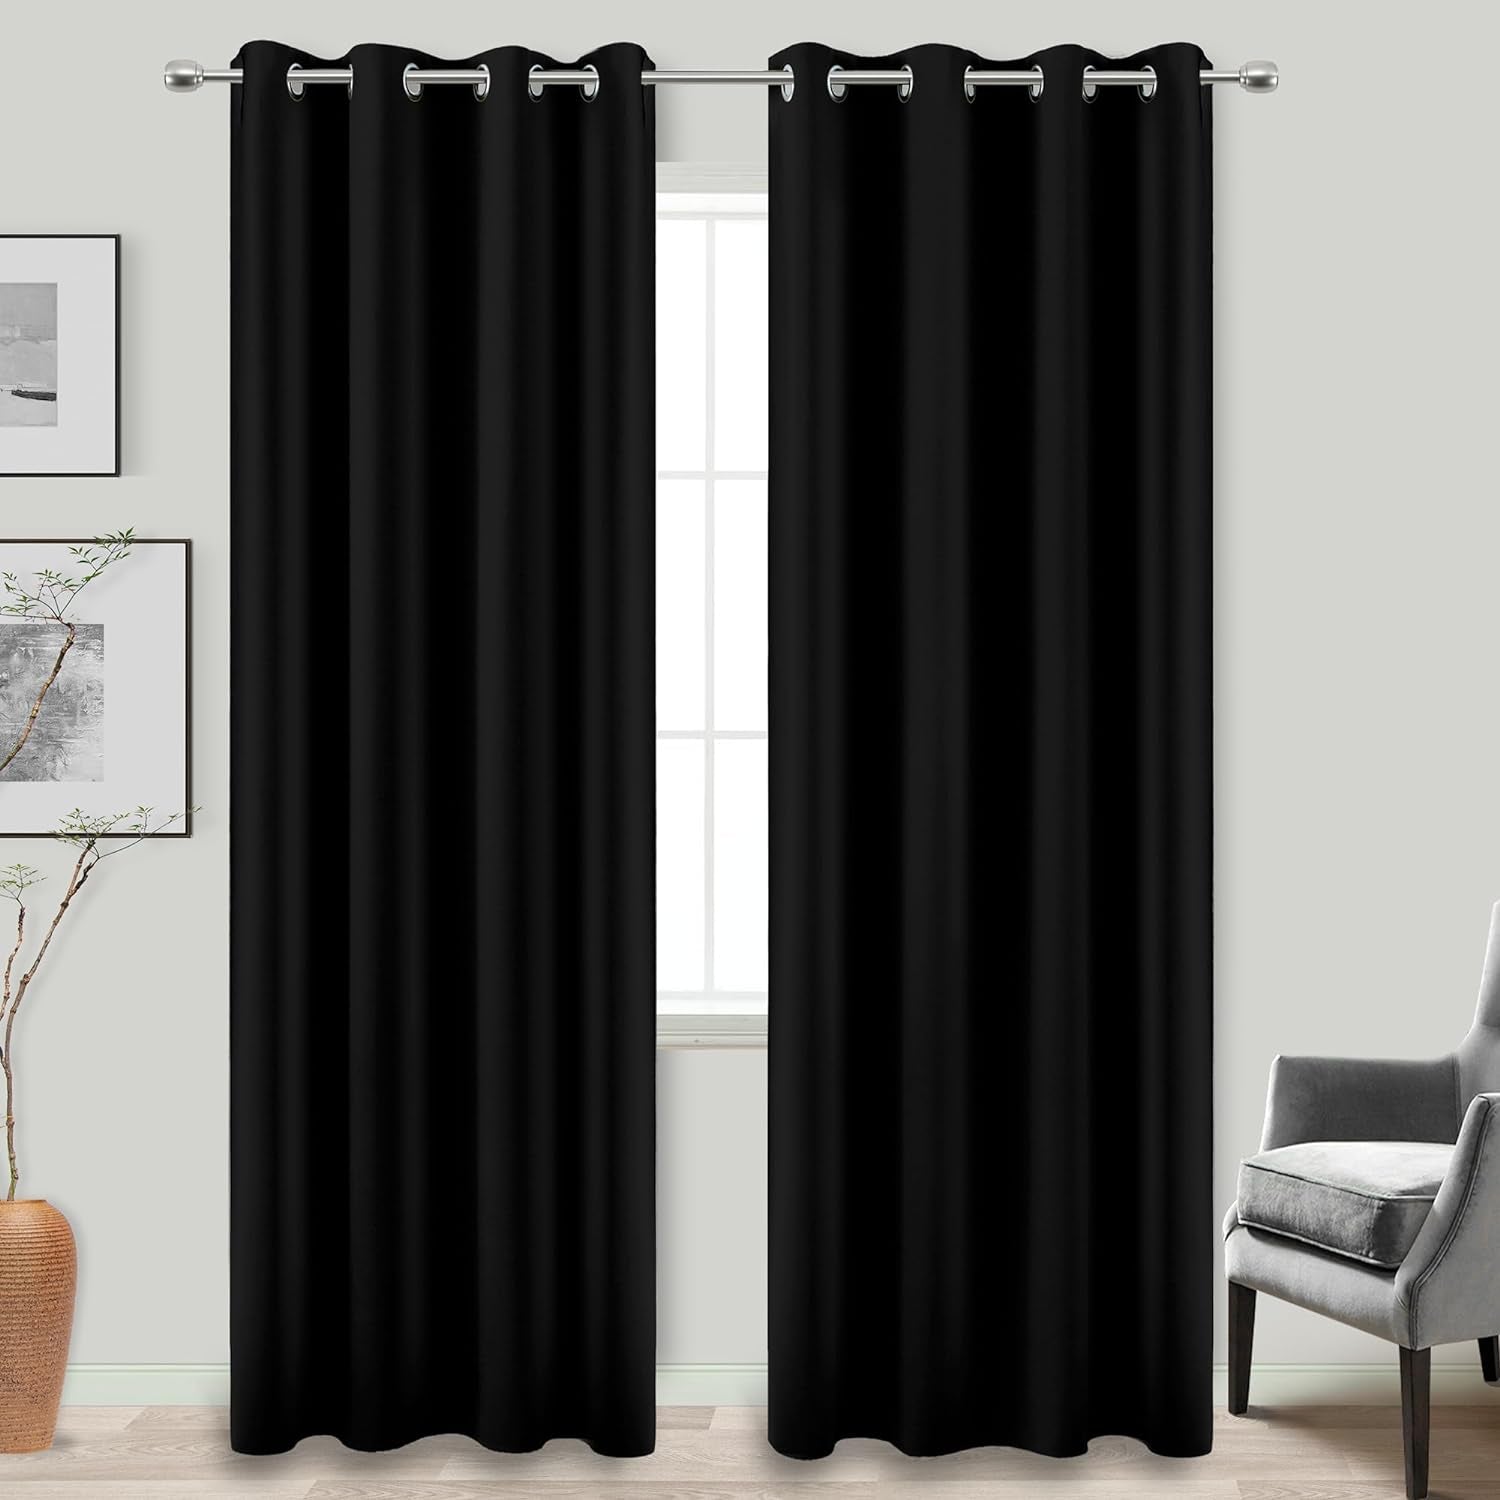 KOUFALL Black Room Darkening Blackout Curtains and Ombre Sheer Curtains Bundle for Living Room Bedroom  KOUFALL   